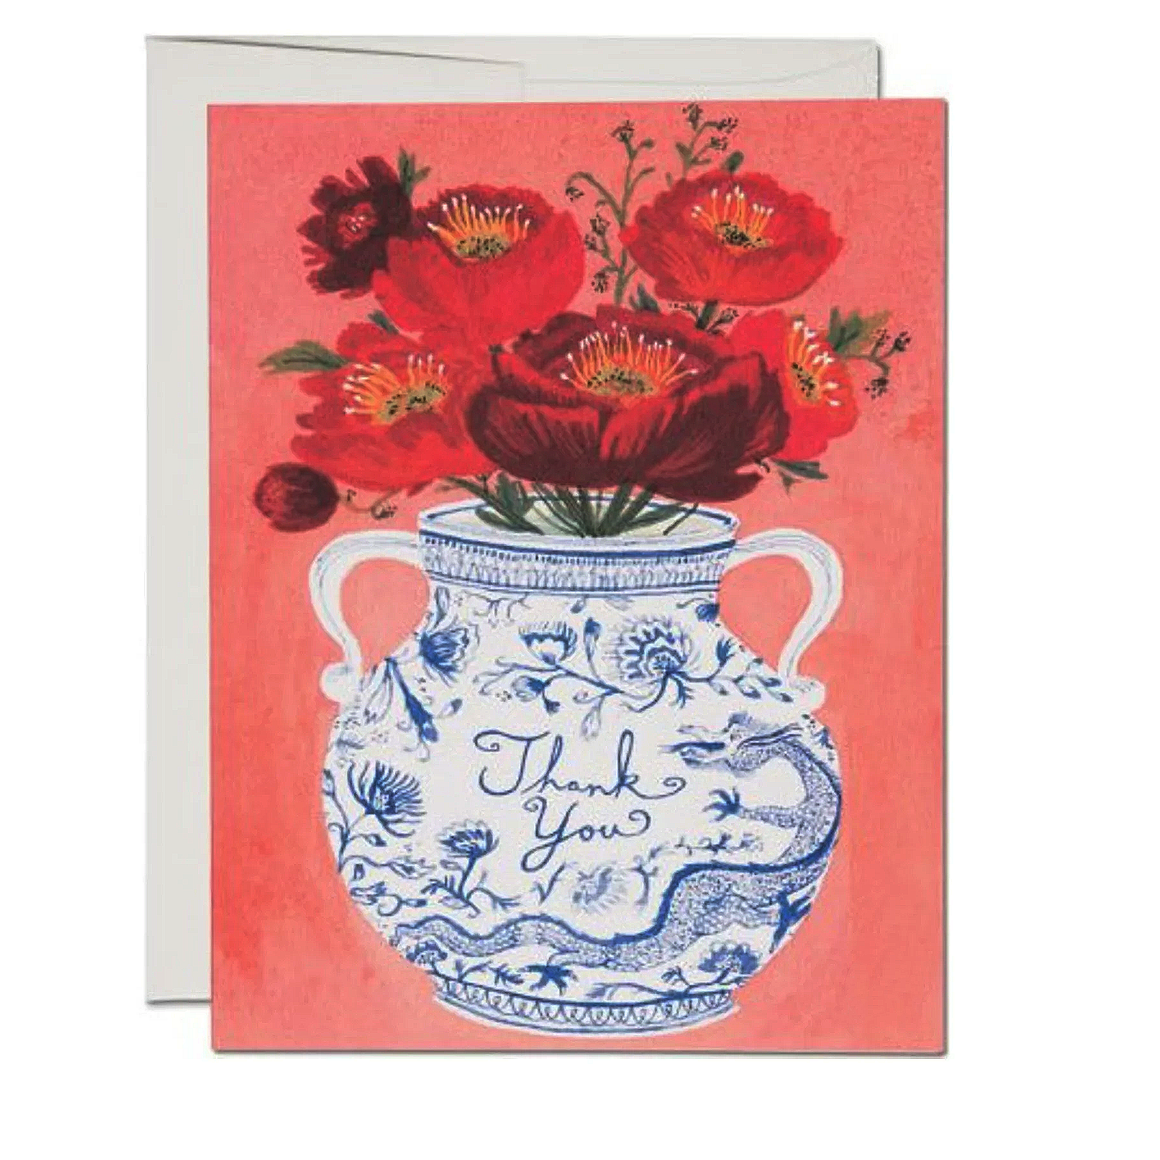 Thank You Vase of Flowers Greeting Card